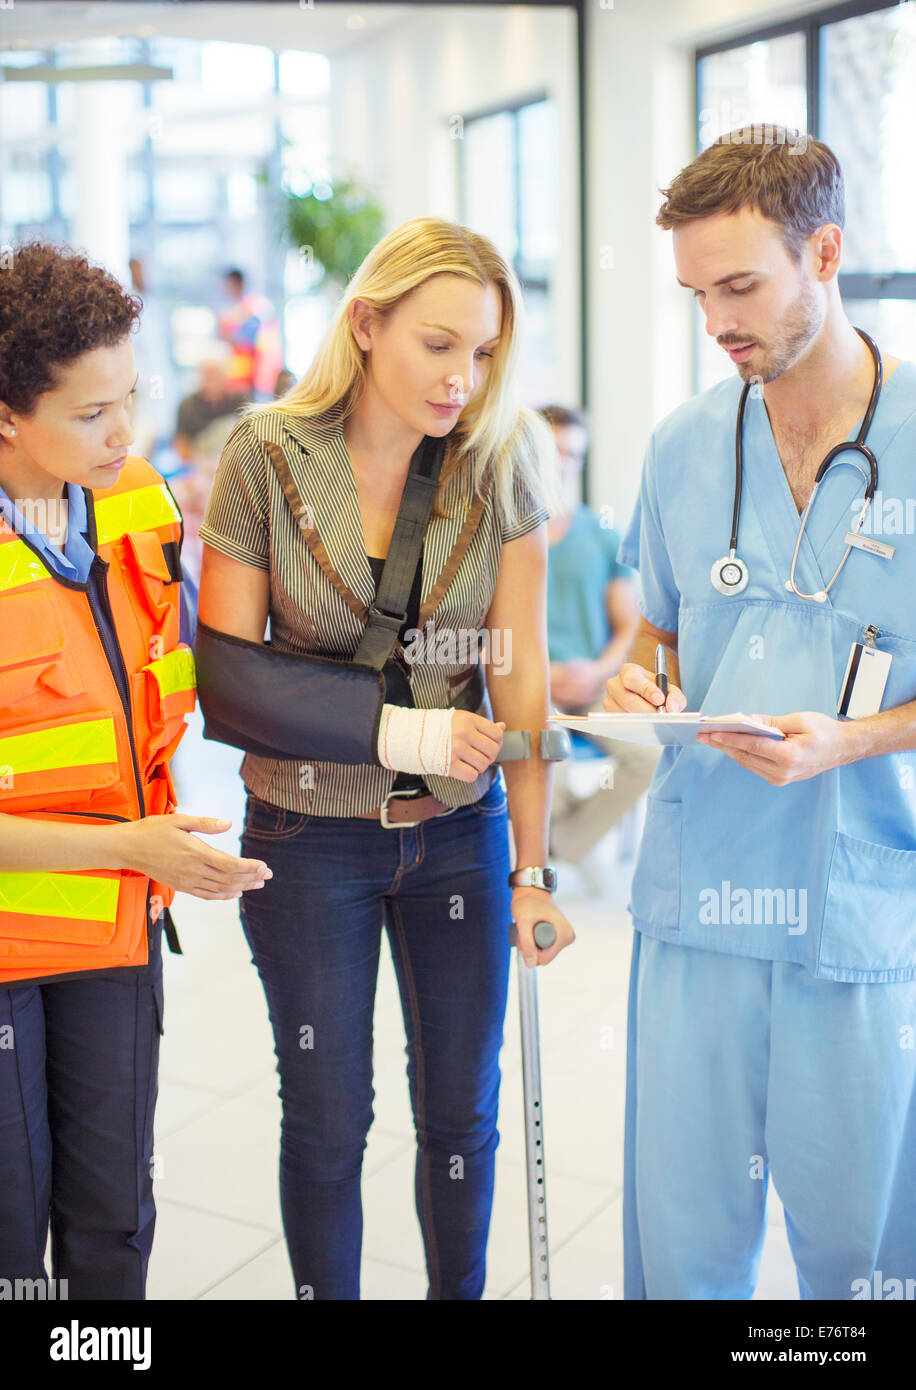 Nurse And Paramedic Talking To Patient In Hospital Stock Photo Alamy